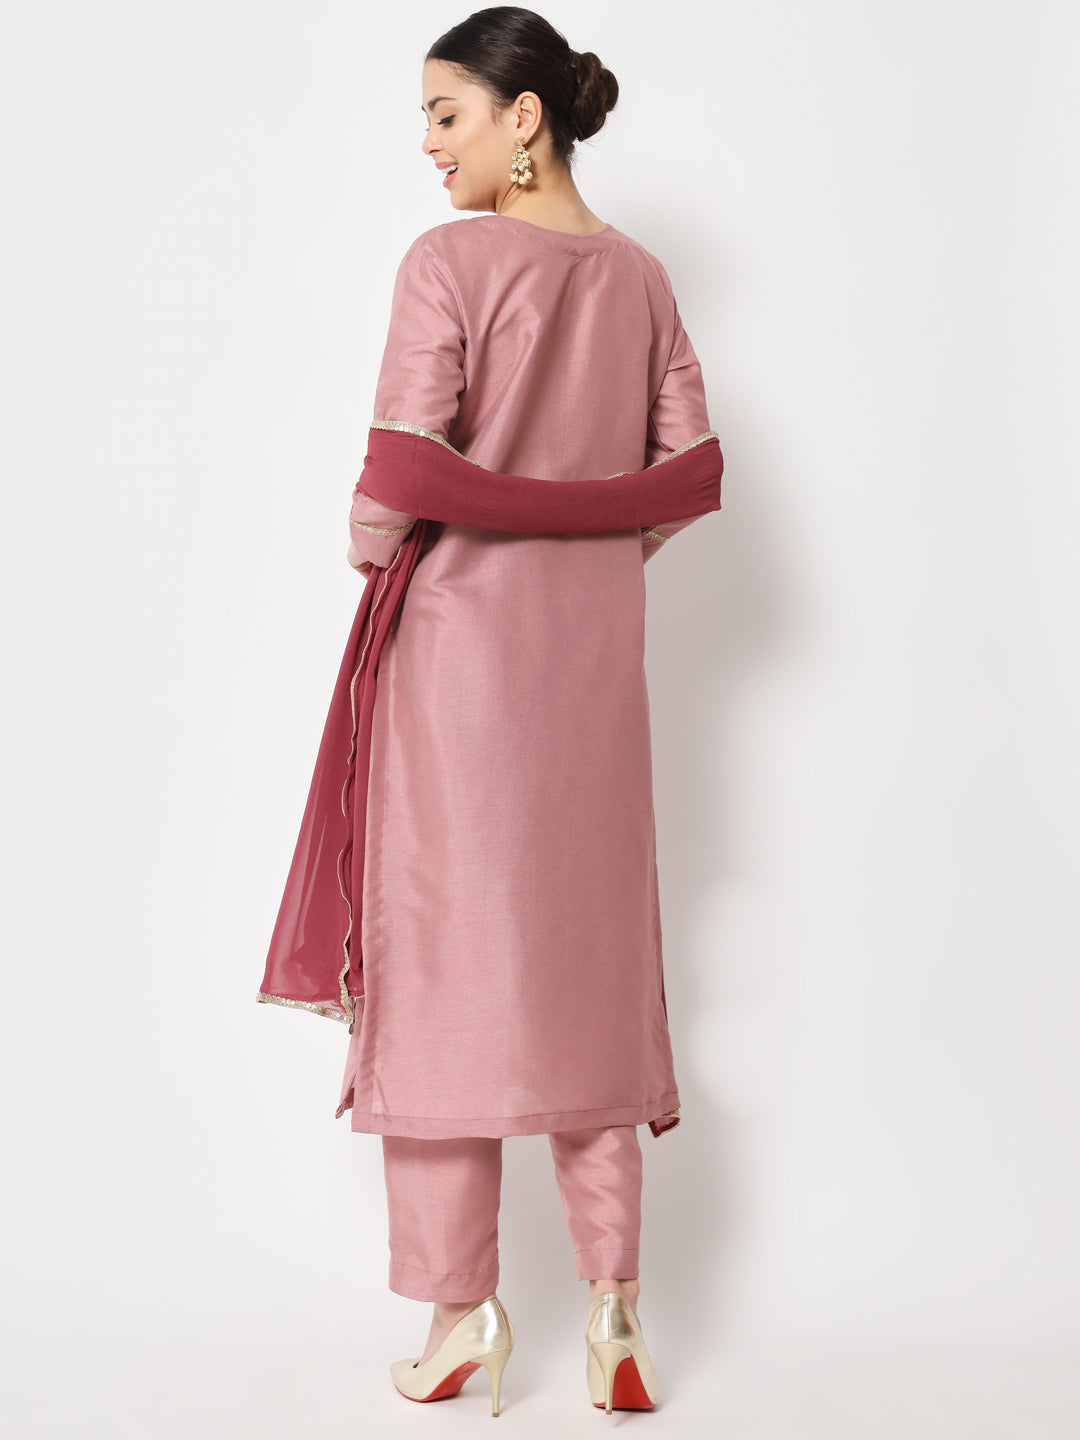 Women's Simple Mauve Sequin Embroidered Kurti With Straight Pants And Dupatta - Anokherang